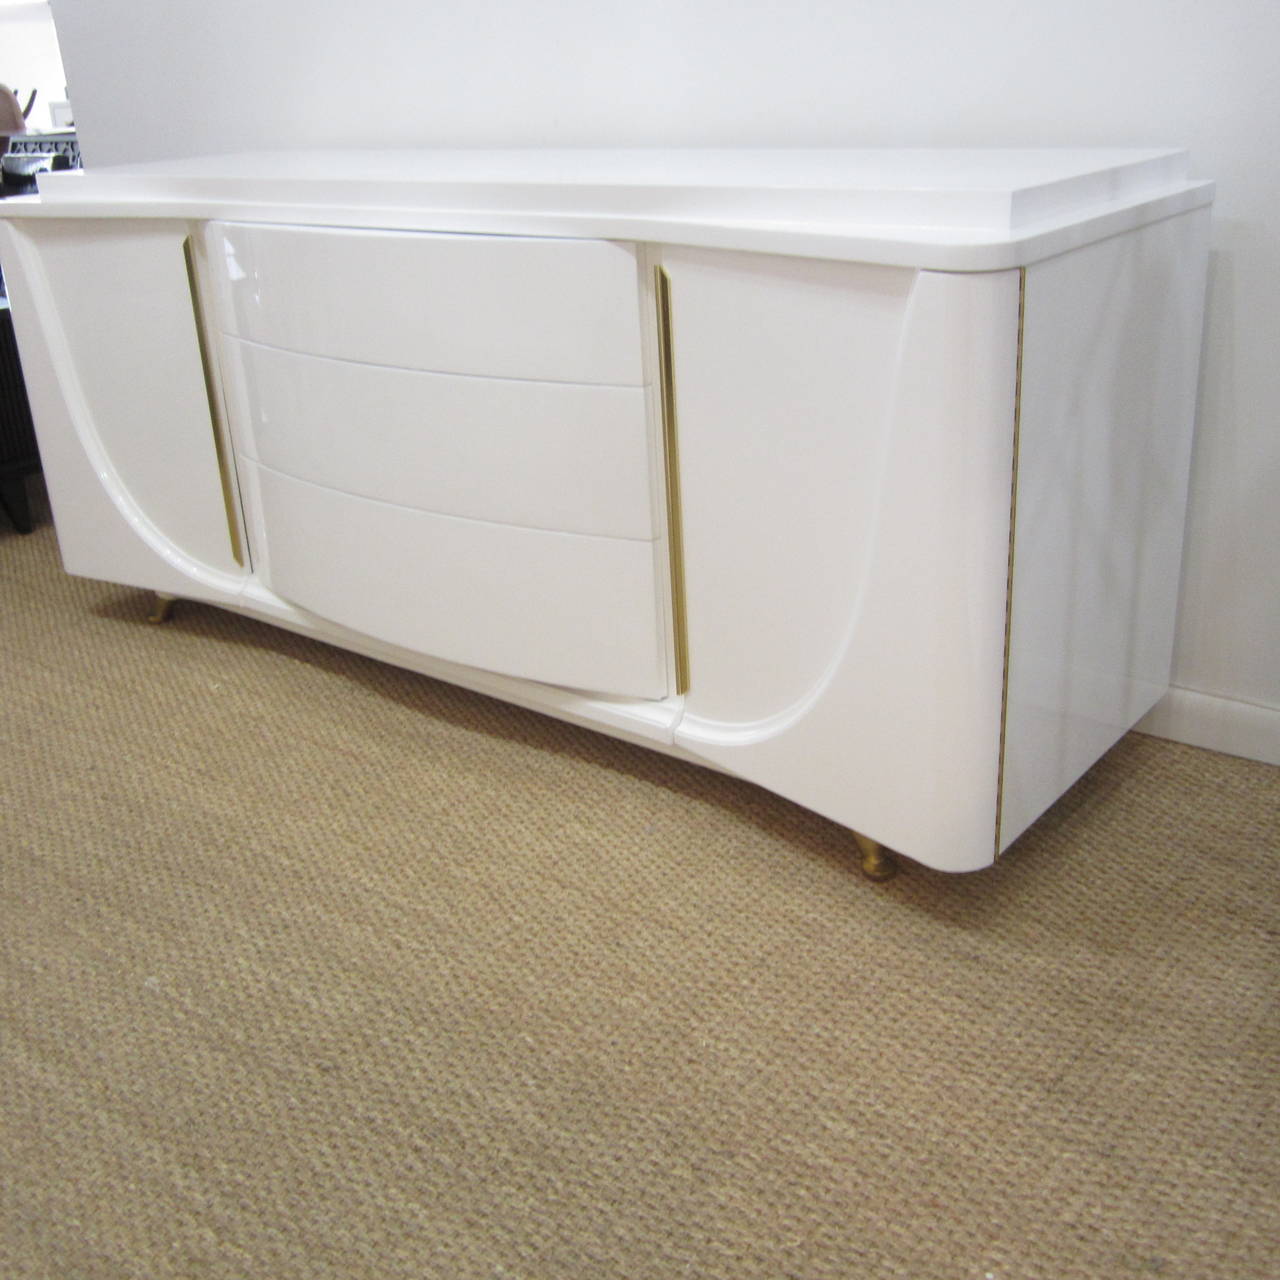 Beautiful low sitting credenza superbly finished inside and out in high gloss white lacquer with vertical brass door pulls. The top has a flat surface on top of a sweeping, curved second tier that flows with the curvaceous lines of the body and